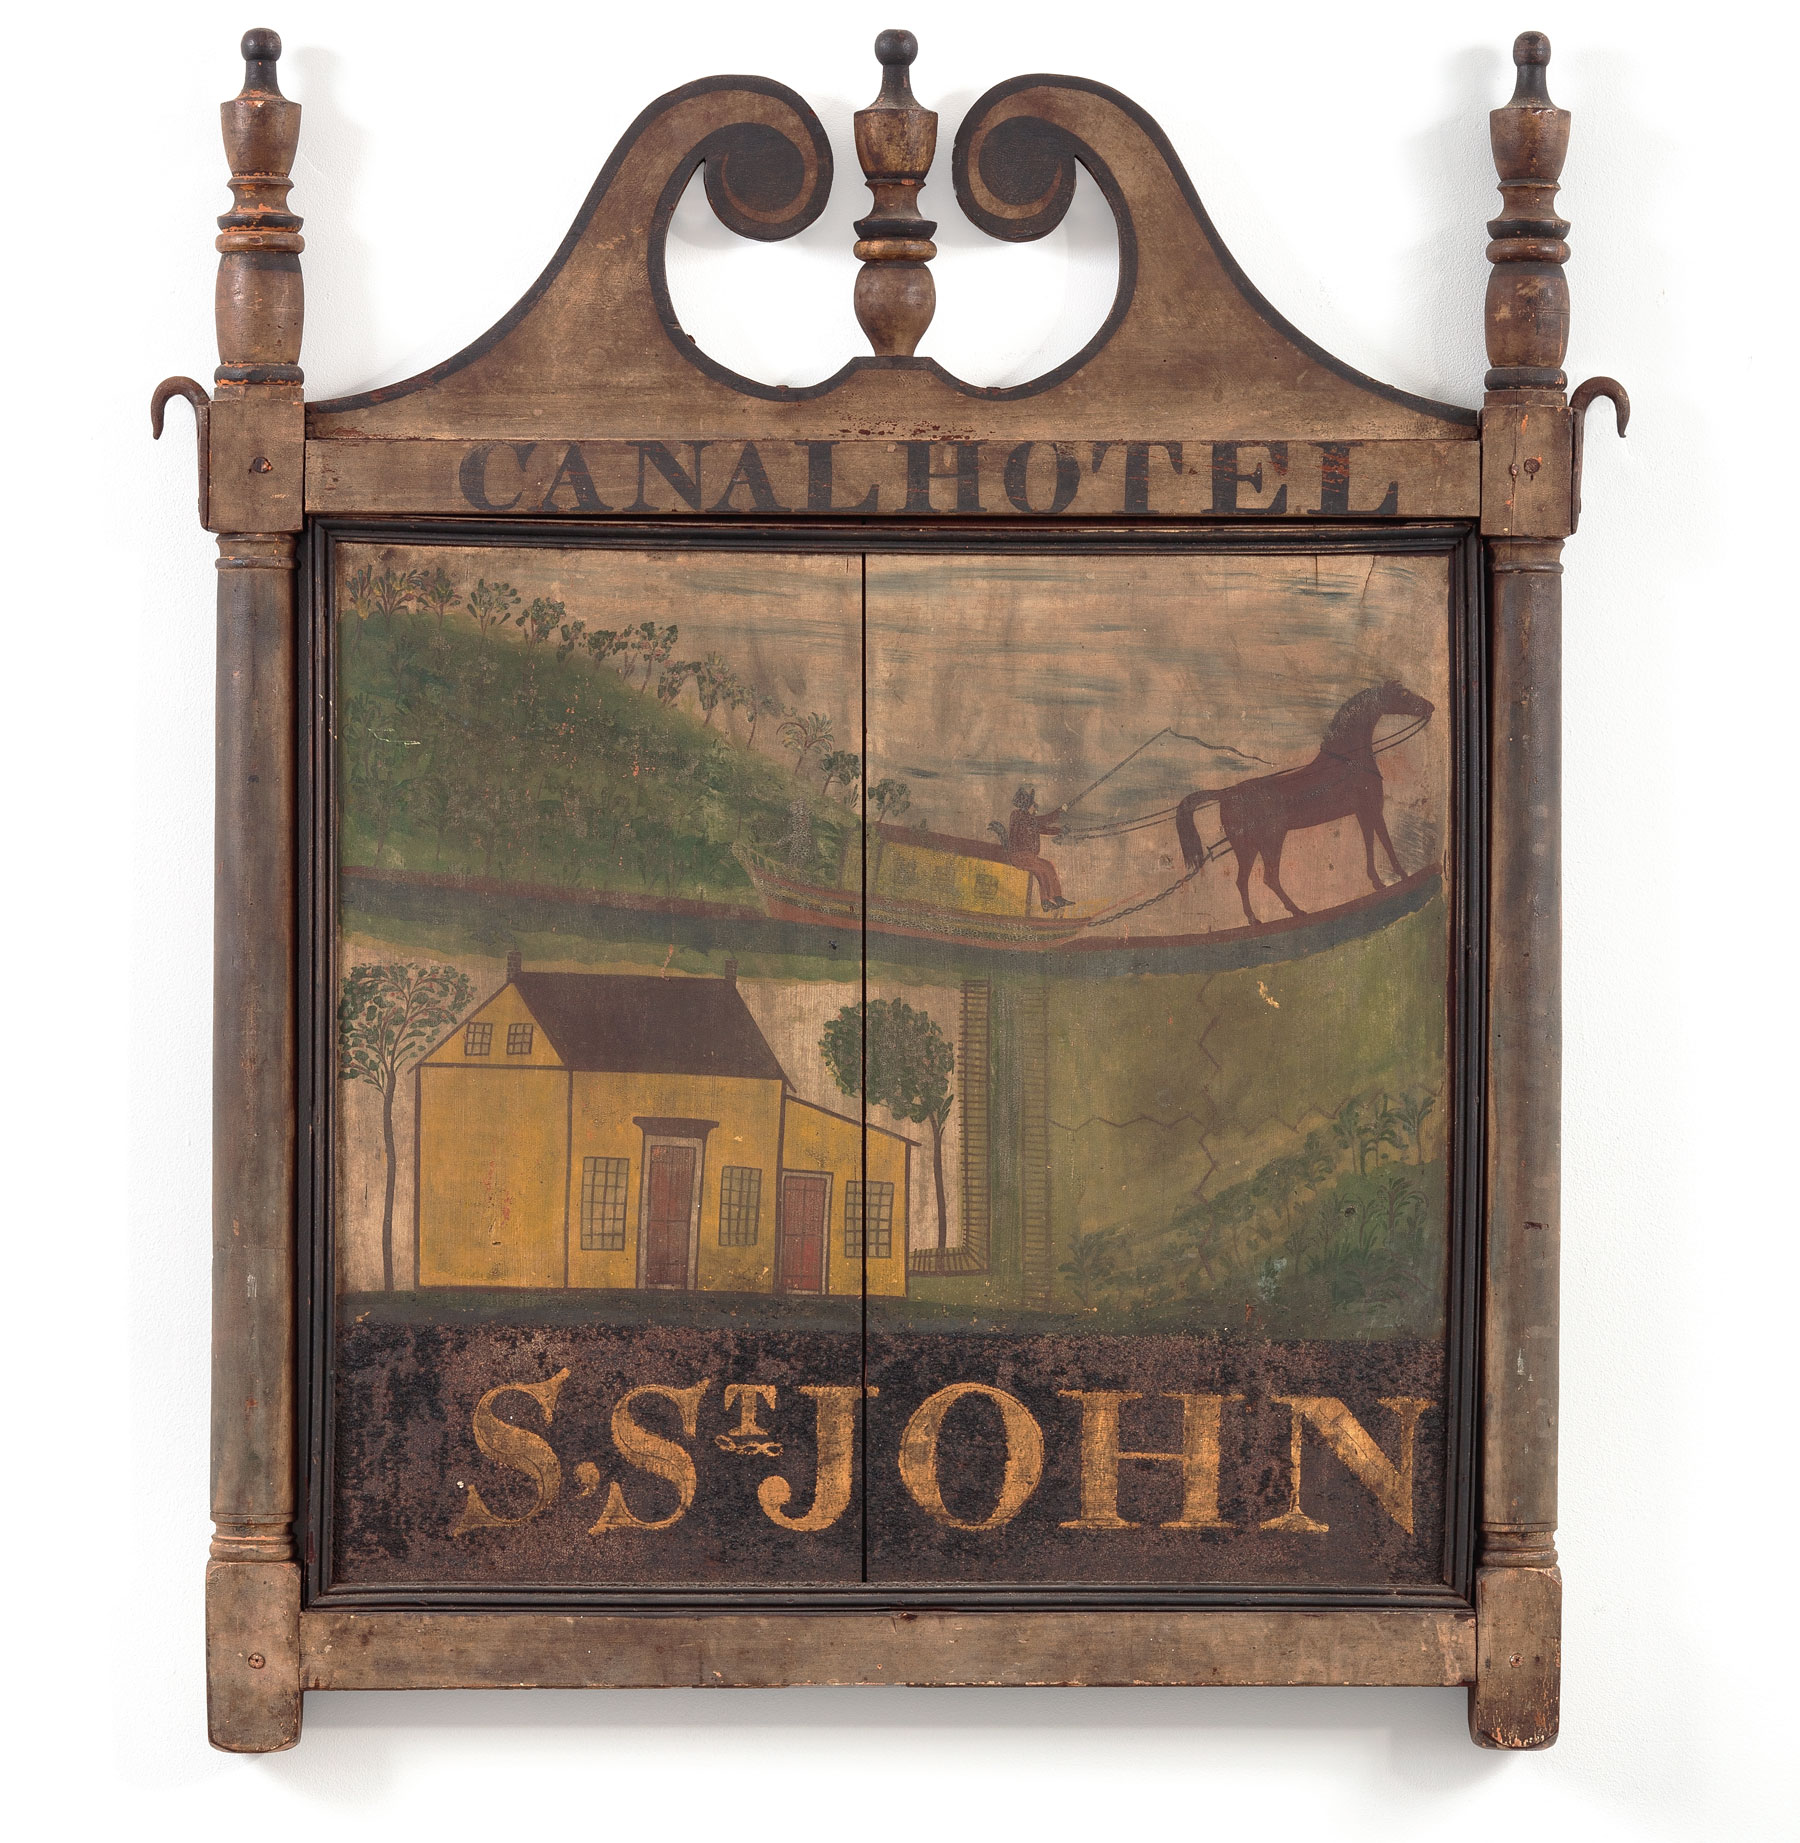 Sign for the Canal Hotel, (reverse identical). Port Jervis, New York, c. 1826, Paint on wooden board and frame, smalt, gold leaf, iron hardware, 41 x 32 in. Private collection. Image courtesy of David A. Schorsch and Eileen M. Smiles, Woodbury, CT. Both sides of the sign are decorated with the same images and lettering but show different amounts of wear.